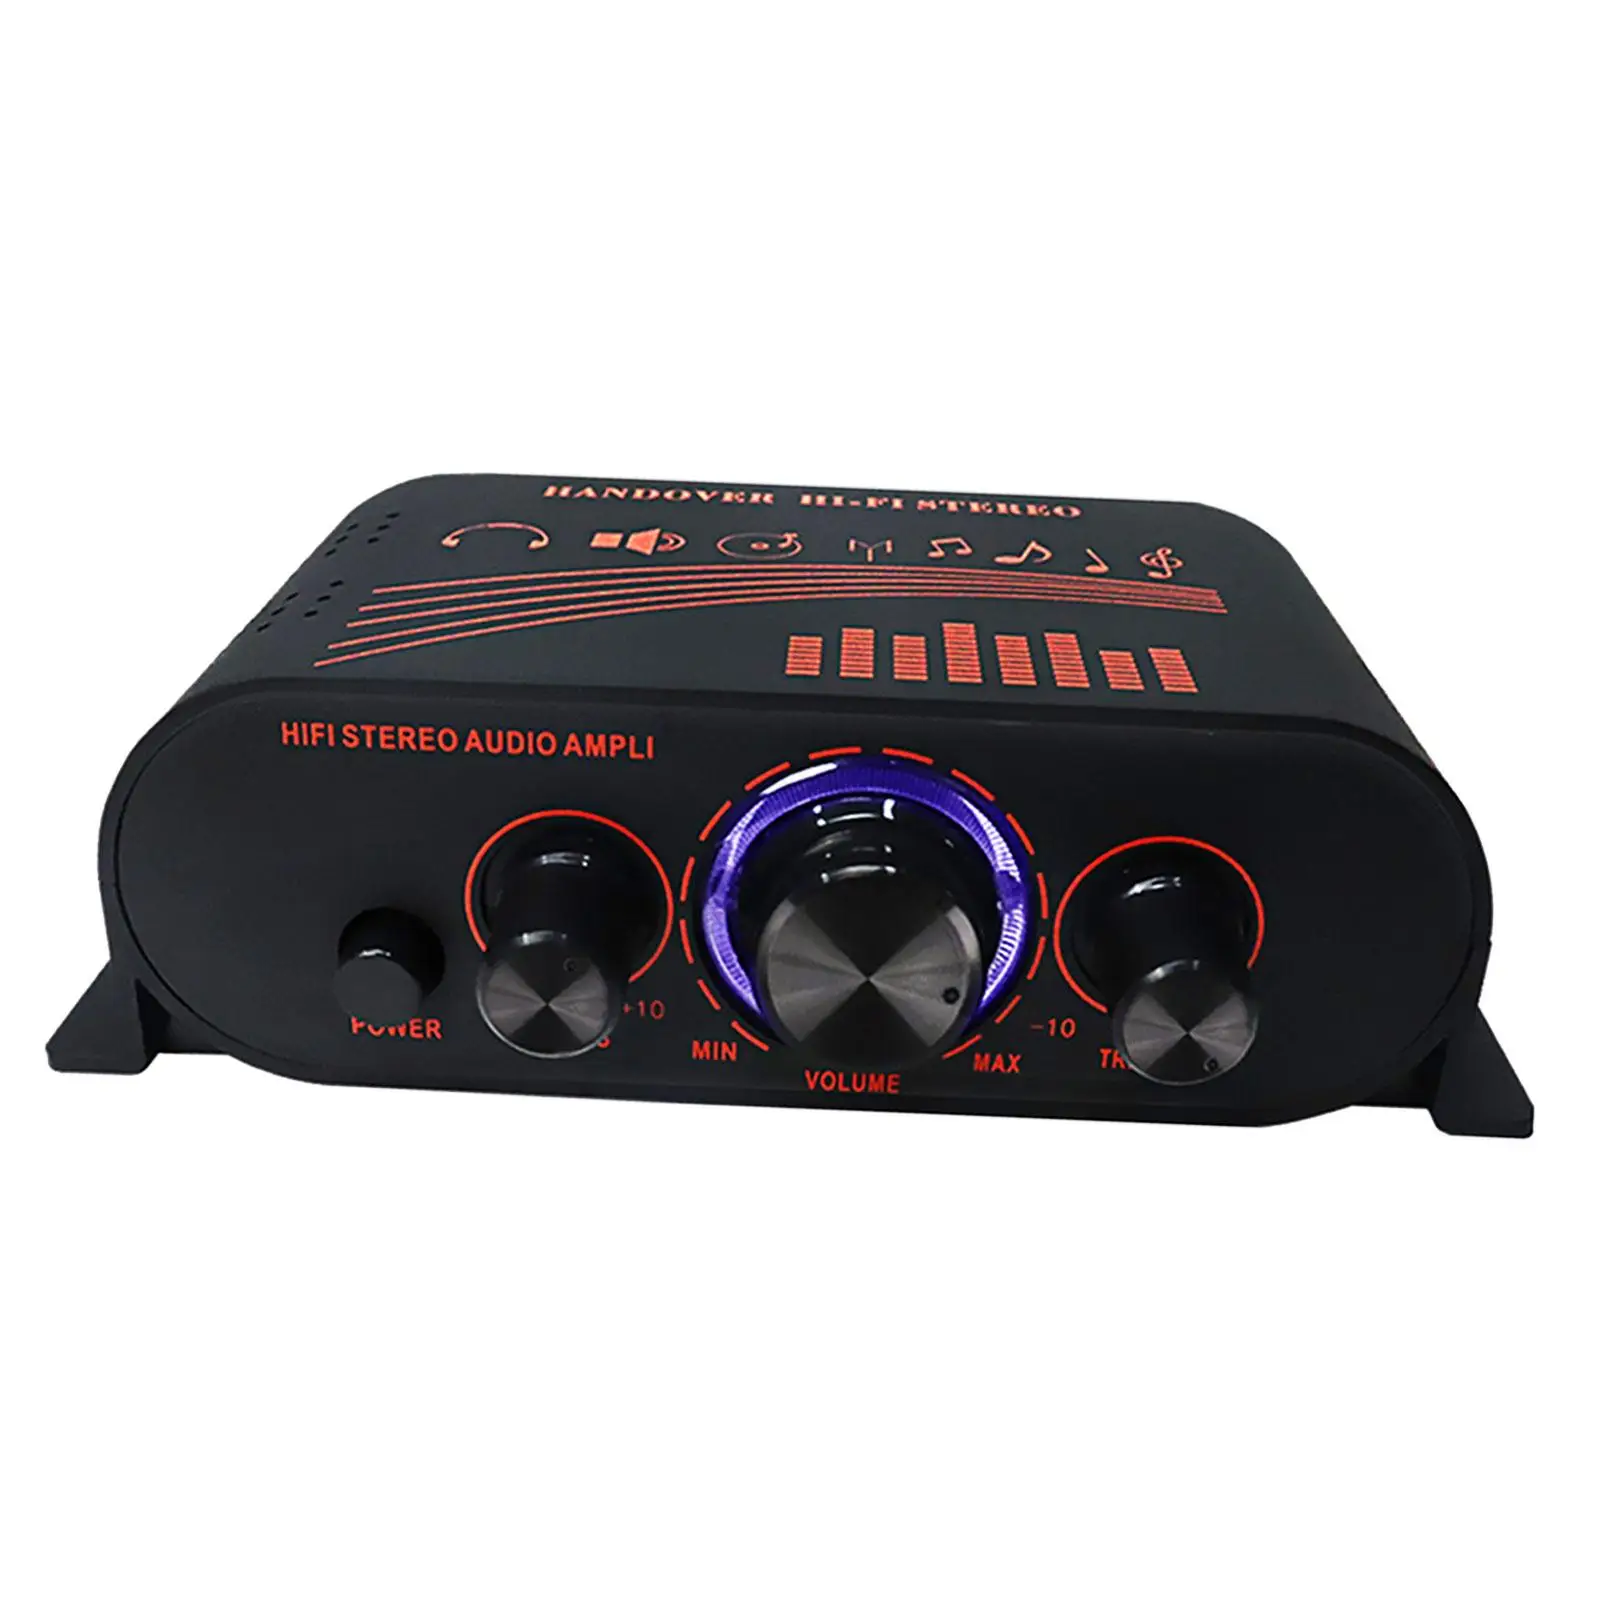 

Mini Digital Audio Power Amplifier Volume Adjustment Powerful Bass Subwoofer Amp HiFi Stereo for Mp3 Motorcycles Cars